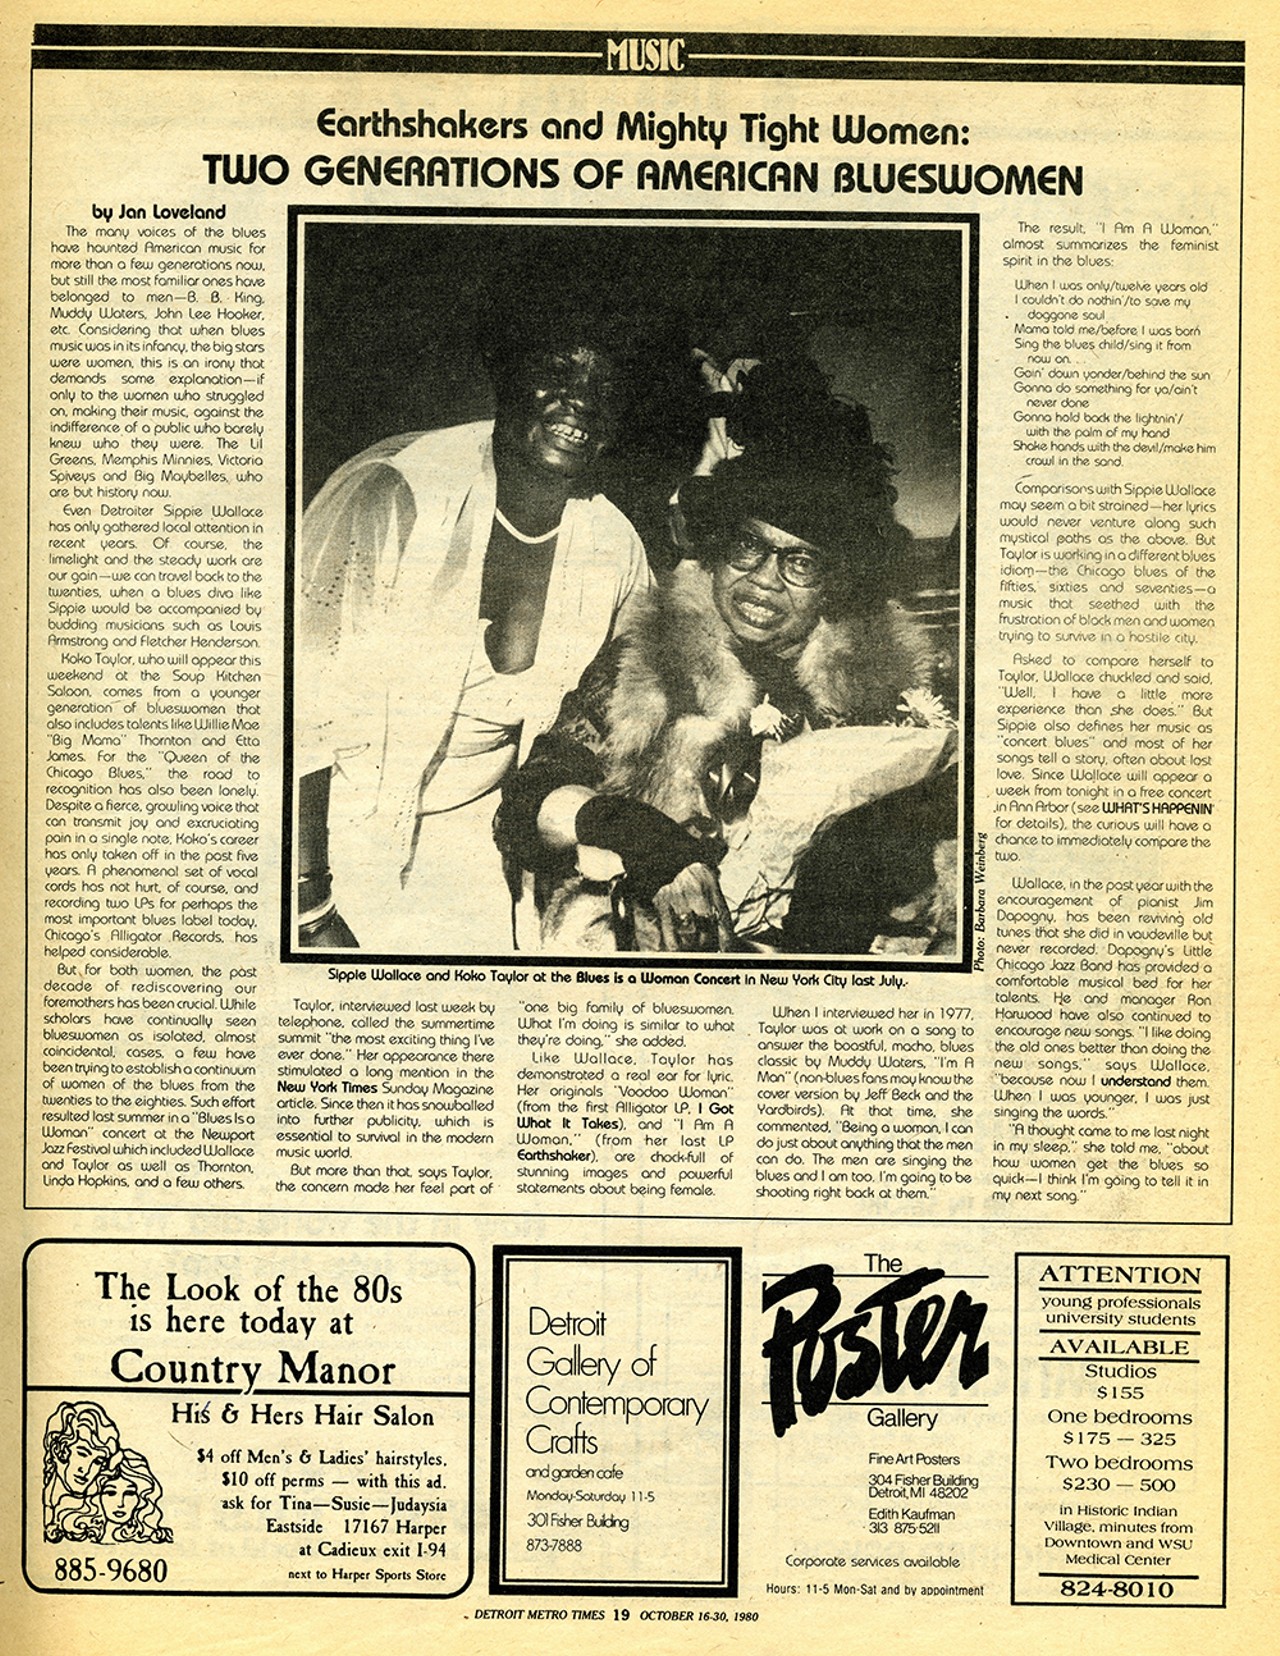 Behold, the first issue of Detroit Metro Times: Oct. 16, 1980